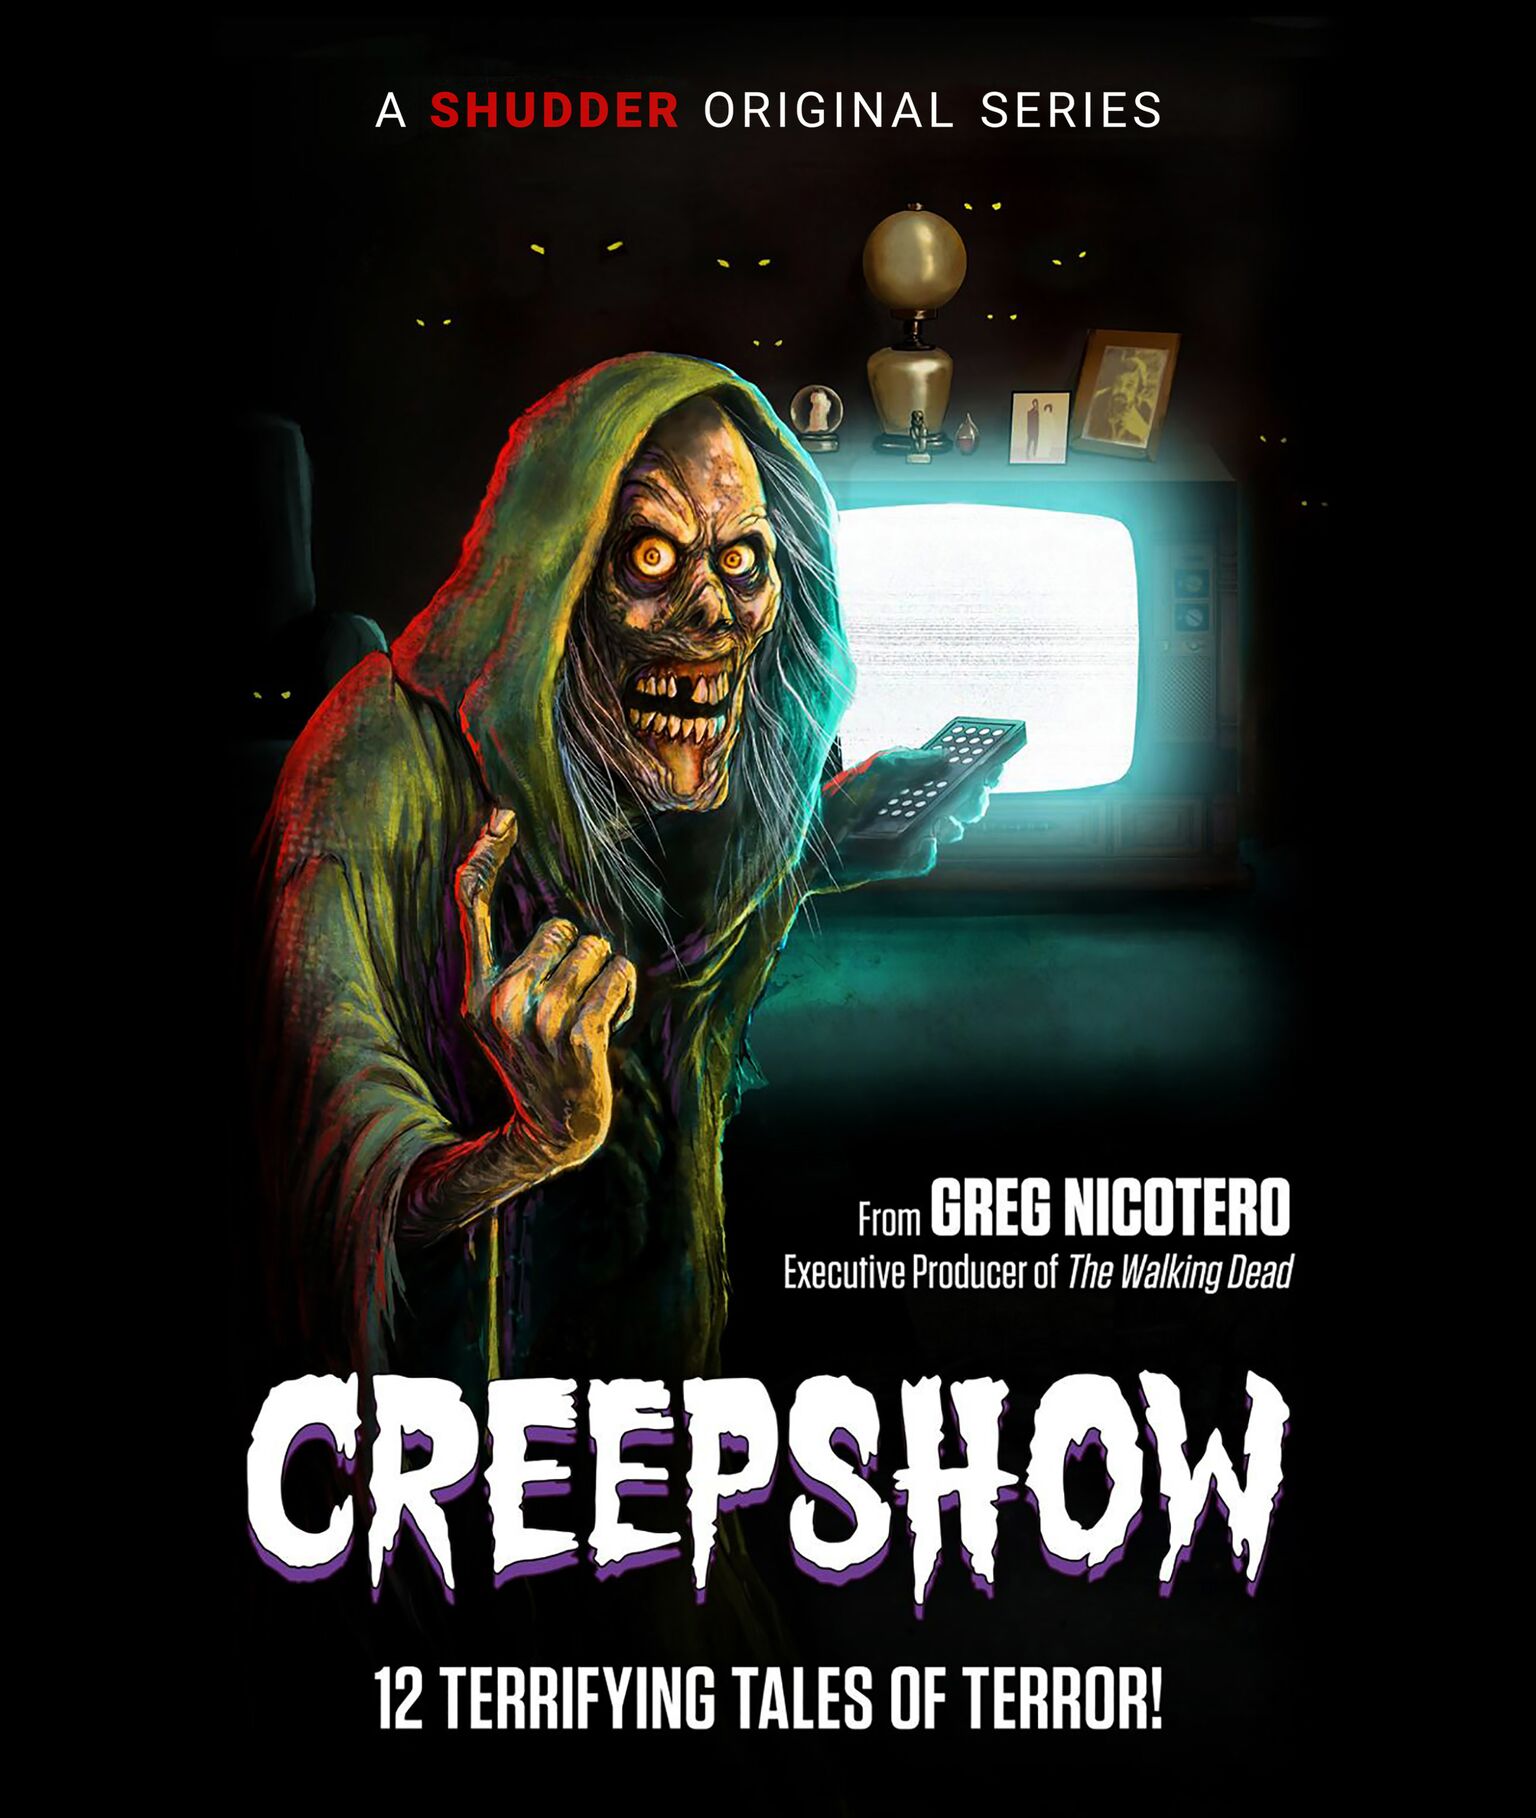 Review: “Creepshow” hits the macabre-mark with Shudder’s new collection